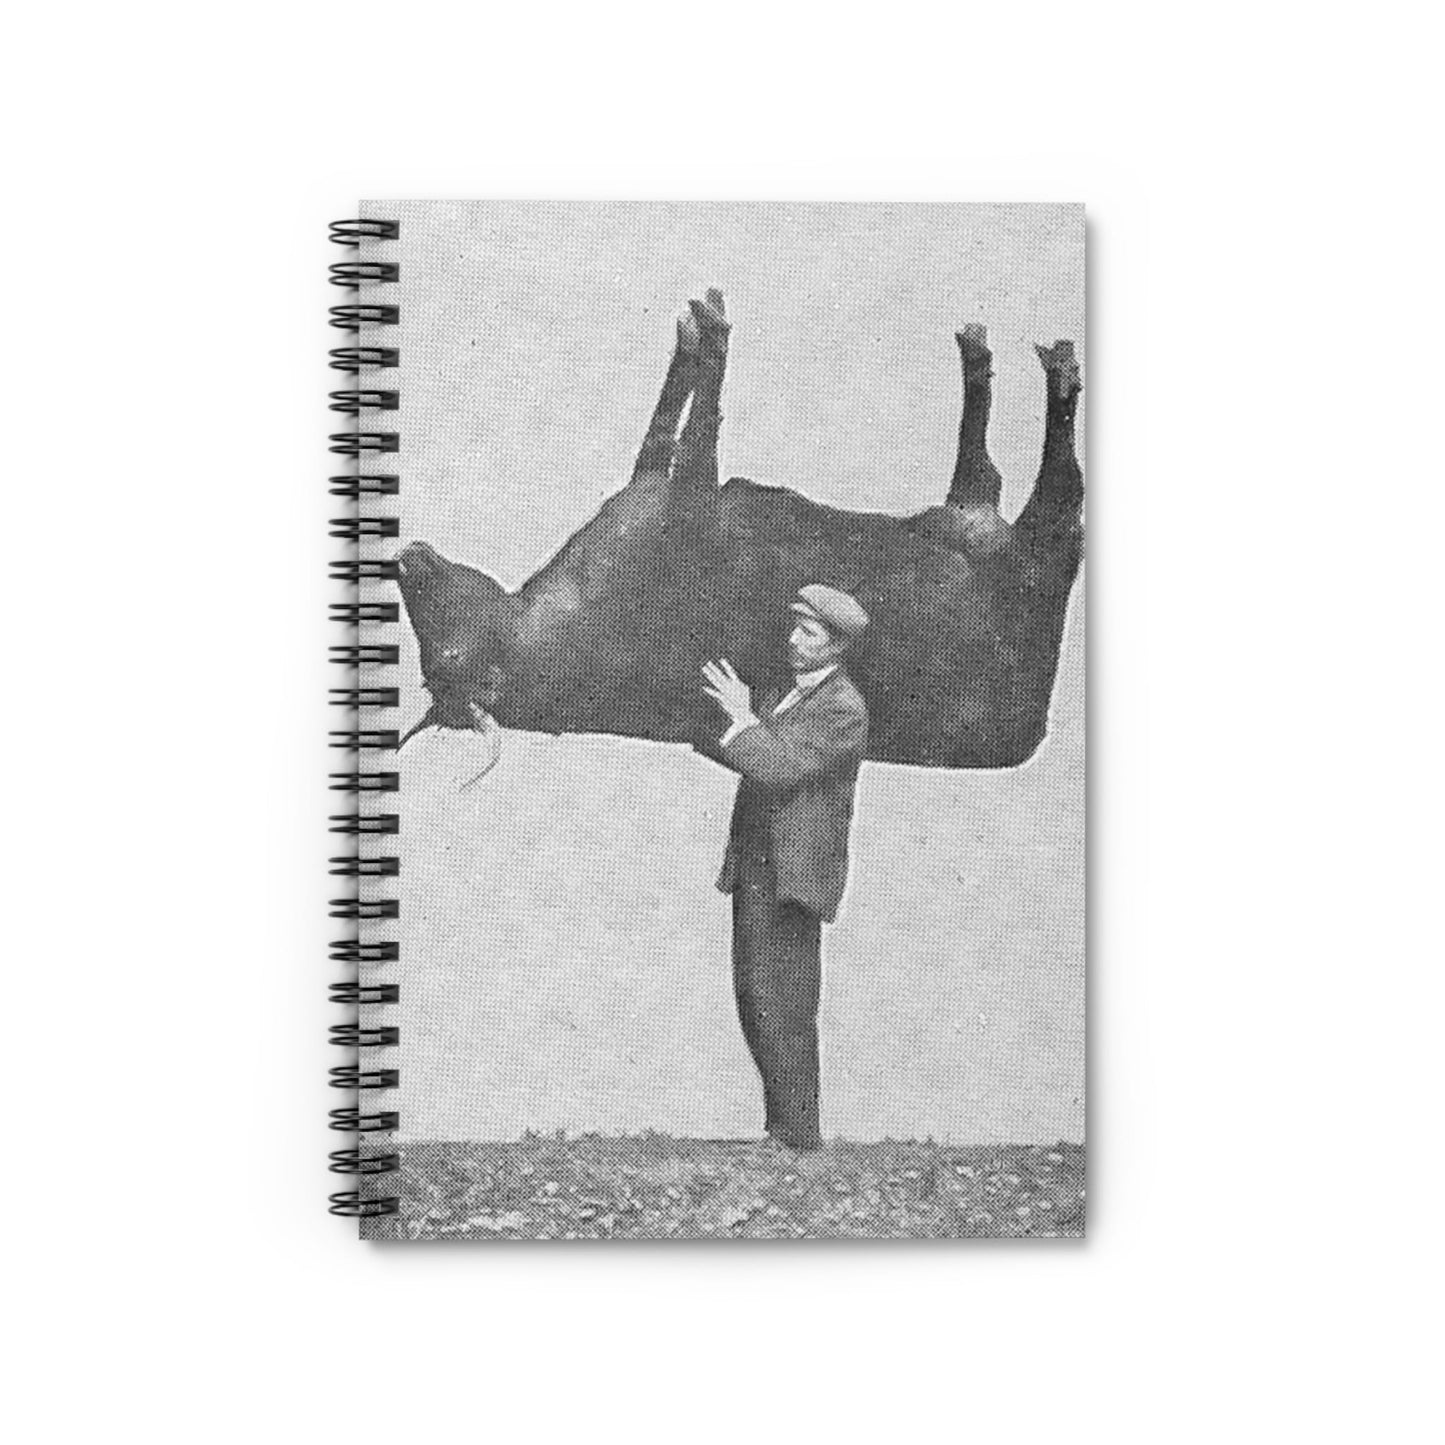 Funny Notebook with funny animals cover, perfect for journaling and planning, showcasing humorous animal illustrations.